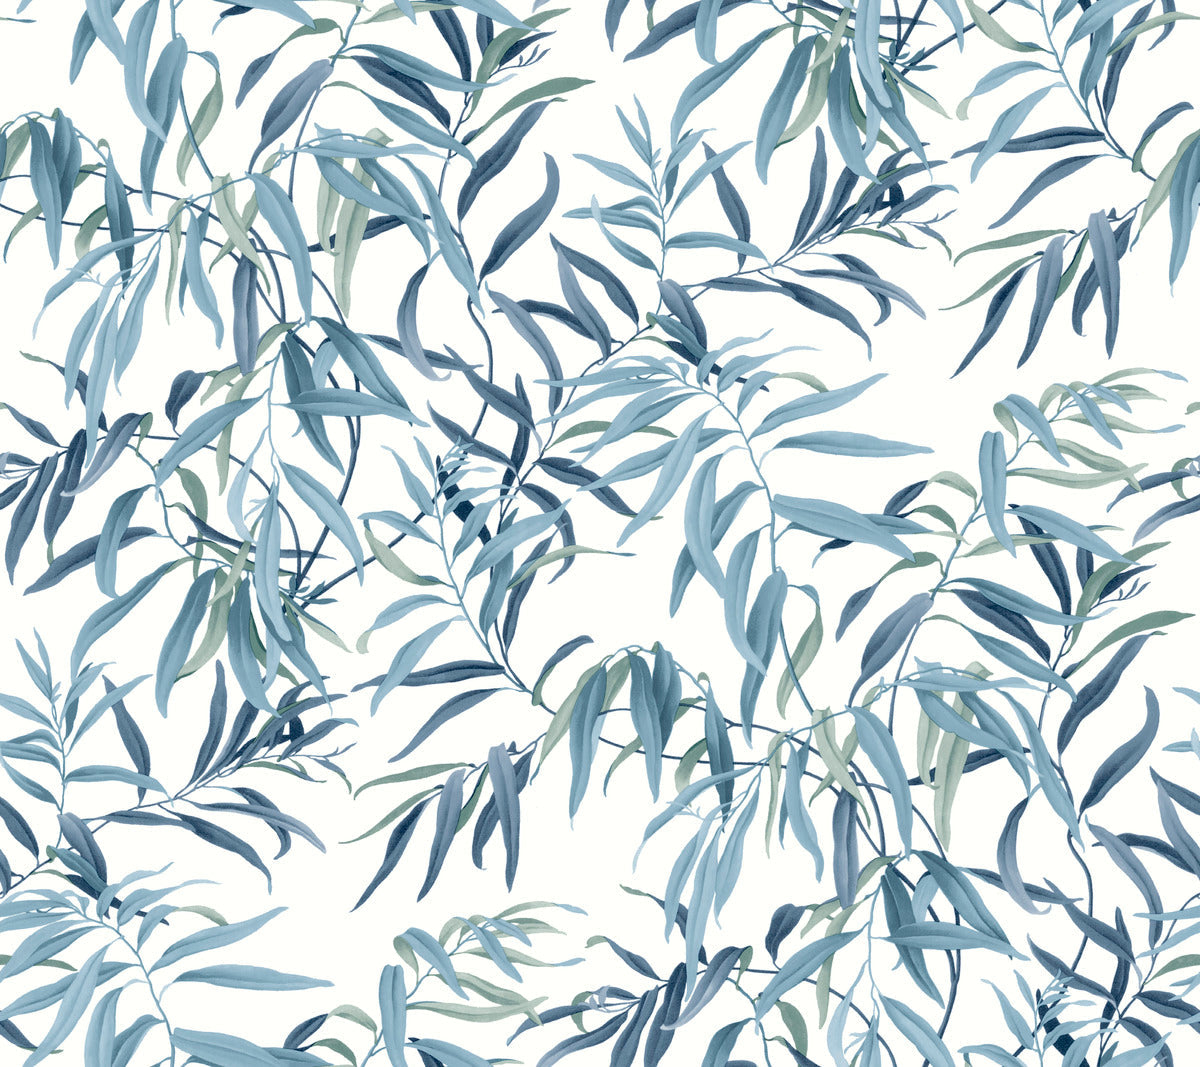 A seamless pattern of blue and green leaves on thin branches set against a white background. The leaves are delicately painted, giving a watercolor effect that creates a soothing, nature-inspired design—perfect for creating a botanical retreat with Willow Grove Clay Wallpaper Pink (60 Sq.Ft.) by York Wallcoverings.